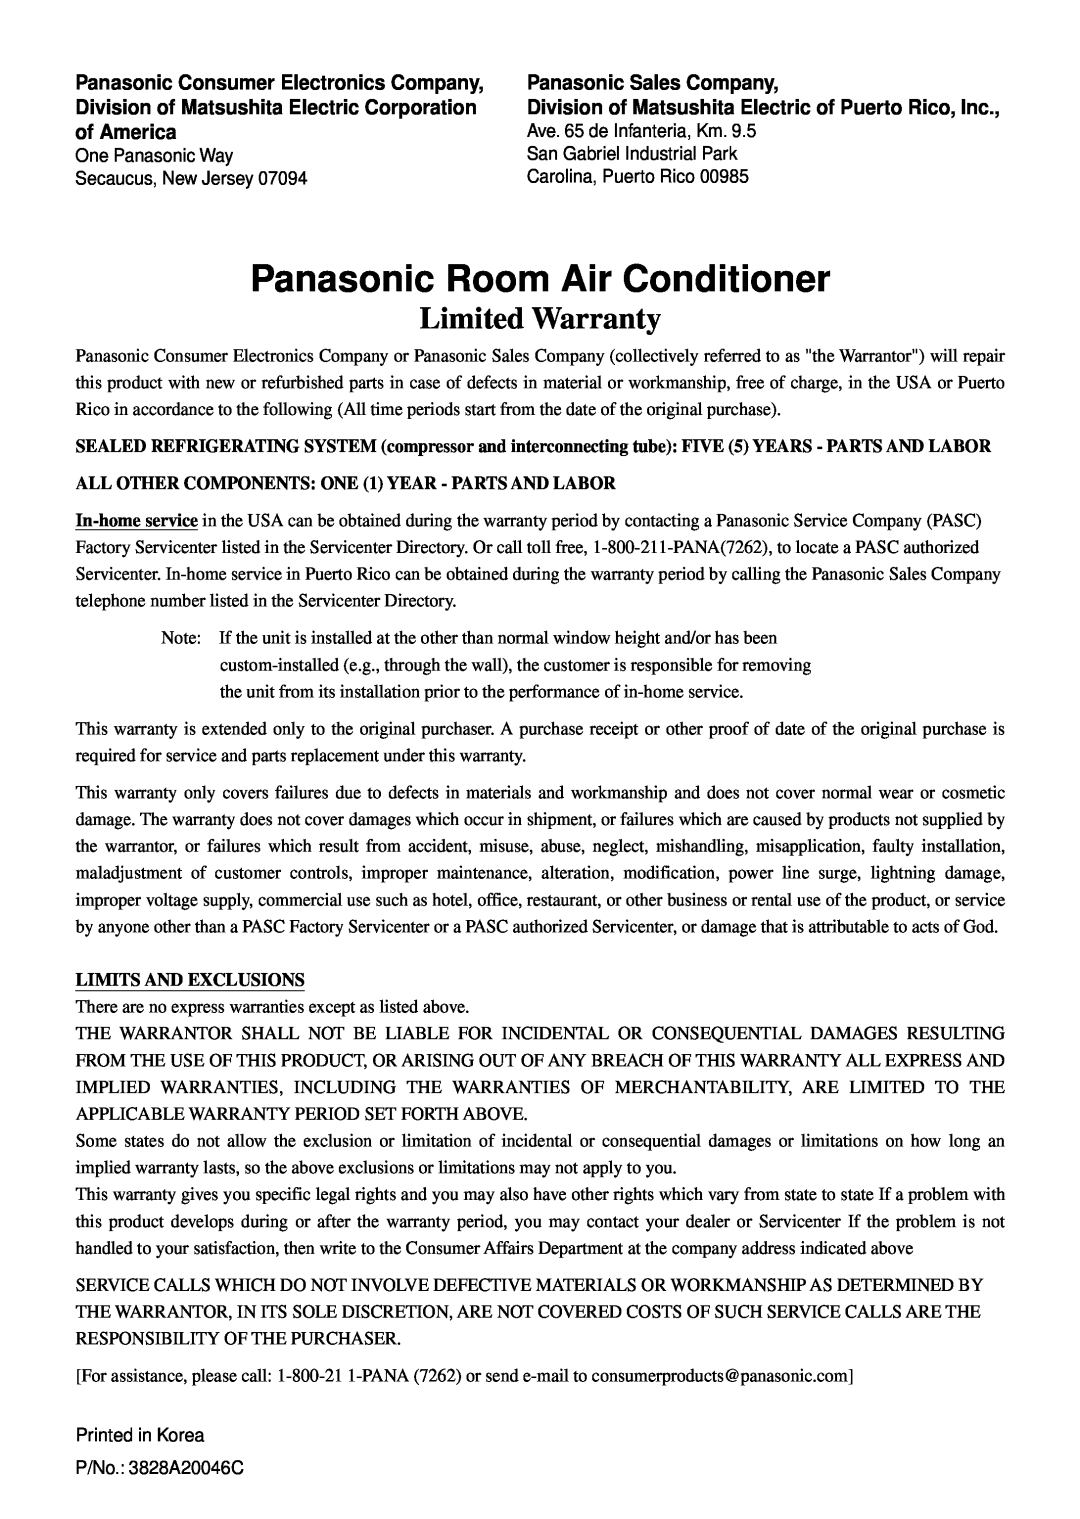 Panasonic HQ-2051TH manual Panasonic Room Air Conditioner, Limited Warranty, Limits And Exclusions 